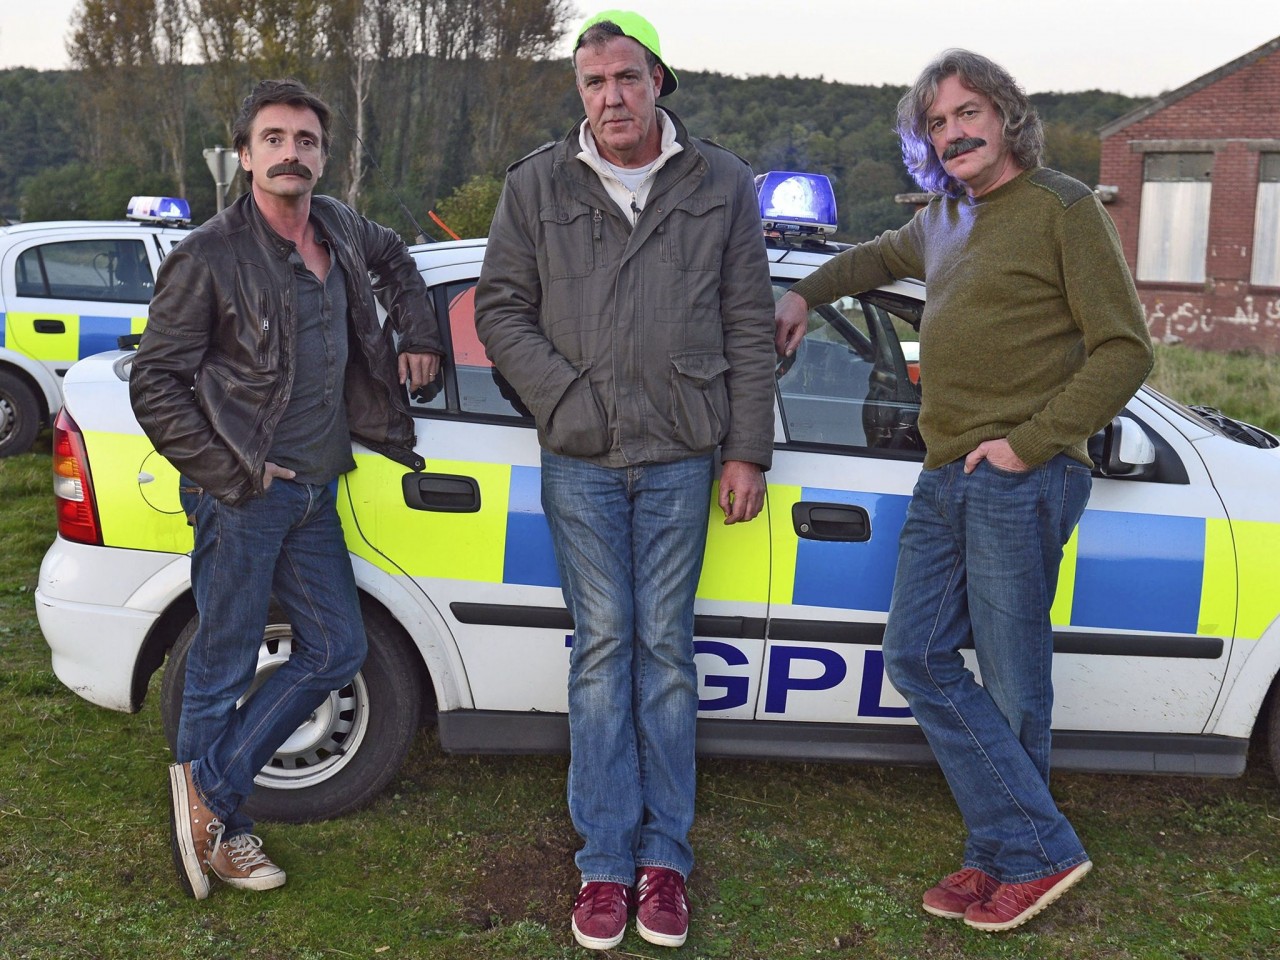 Top Gear Lads Messing Around - High Definition, High Resolution HD  Wallpapers : High Definition, High Resolution HD Wallpapers